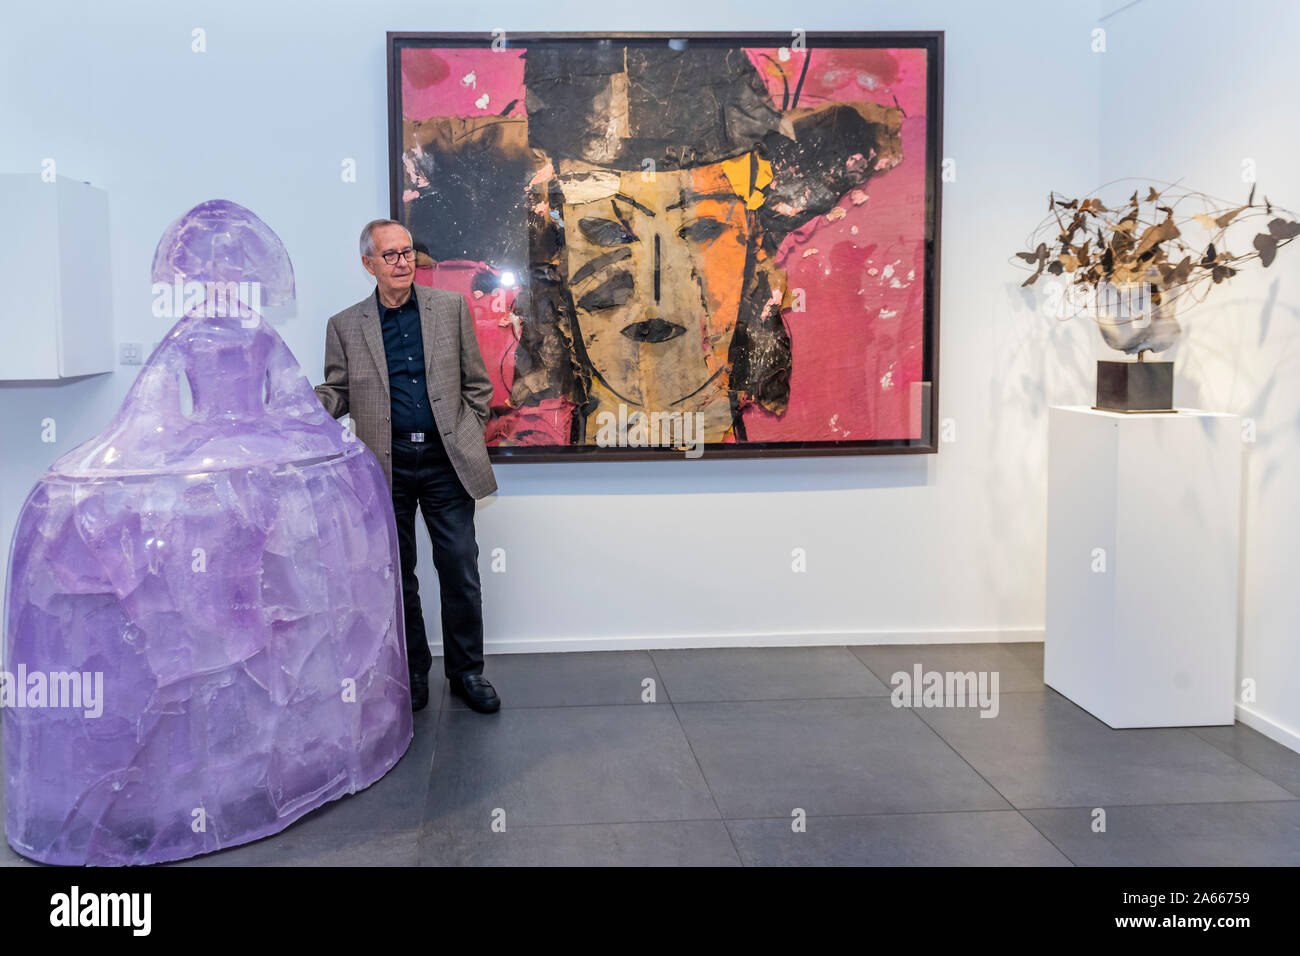 London, UK. 24th Oct 2019. London, UK. 24th Oct, 2019. Manolo Valdes with Menina Ropsa and Retro Con Pamela - Opera Gallery previews a new exhibition by the Spanish pop art pioneer Manolo Valdés which runs at their New Bond Street gallery in London on 25 October - 15 November. The exhibition showcases 30 works, spanning 2006 to 2019, ranging from sculpture to painting with a spotlight on the artist's craftmanship. Credit: Guy Bell/Alamy Live News Stock Photo